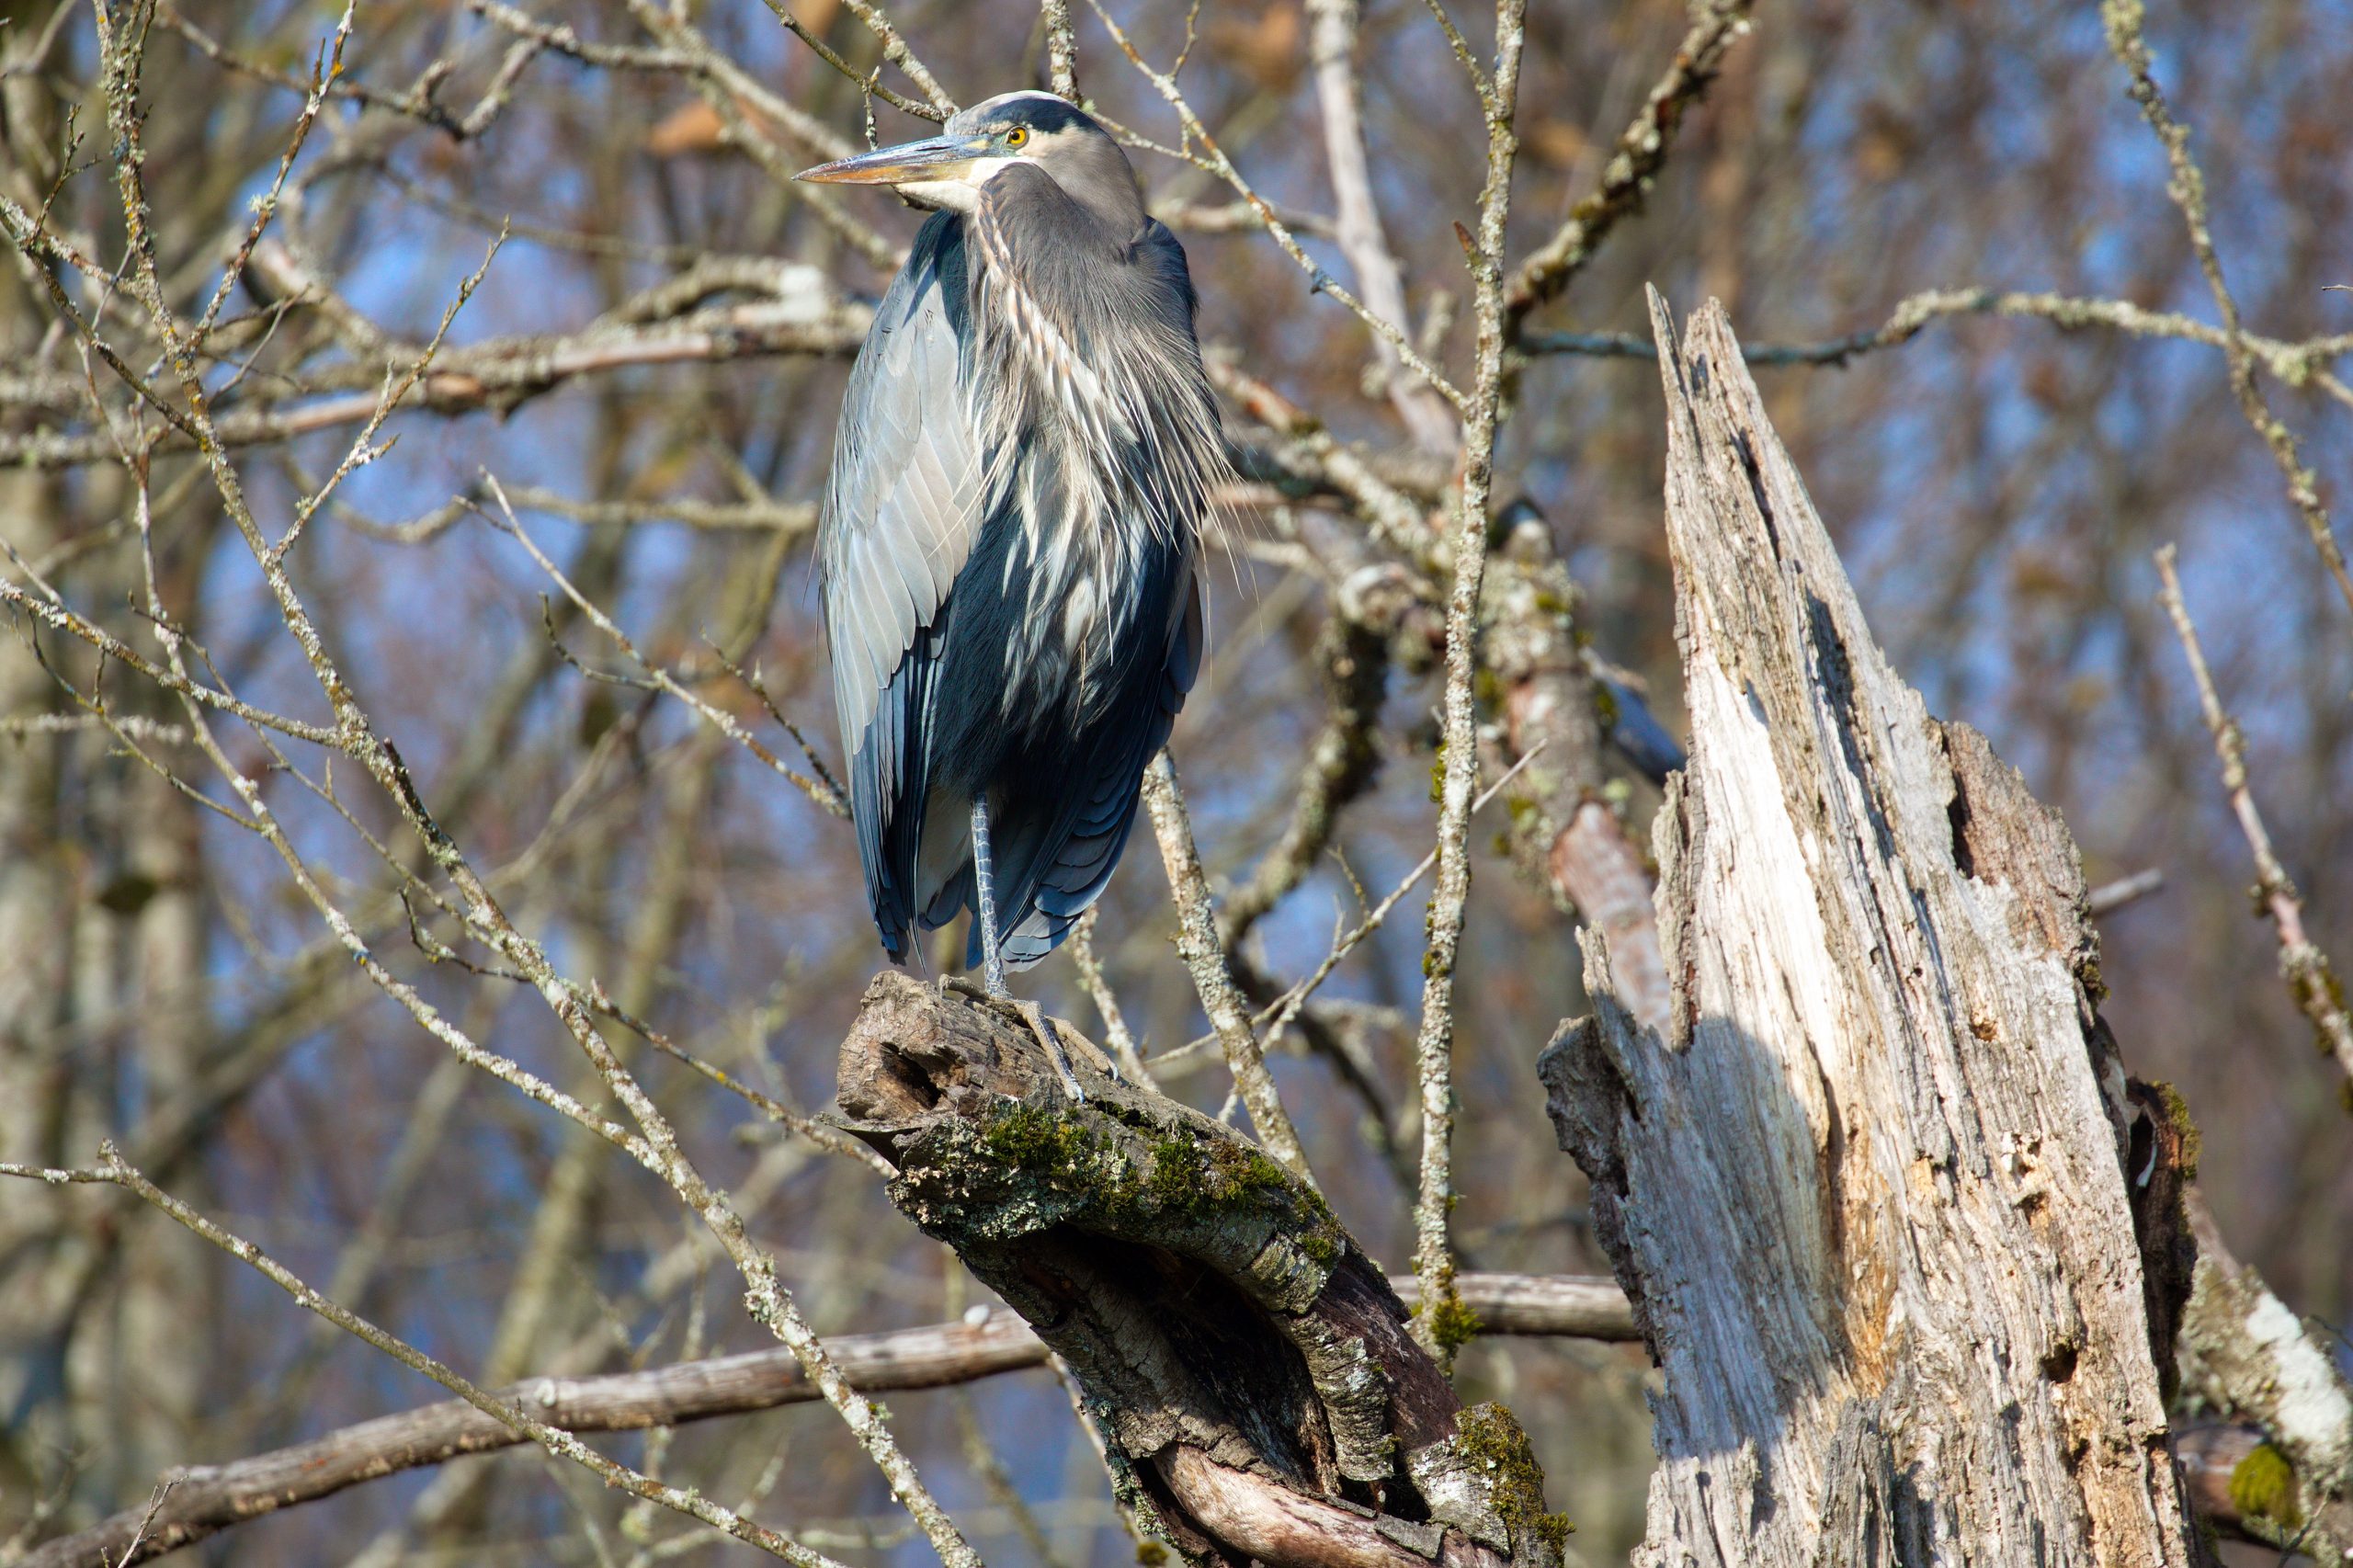 How You Can Help Nesting Herons